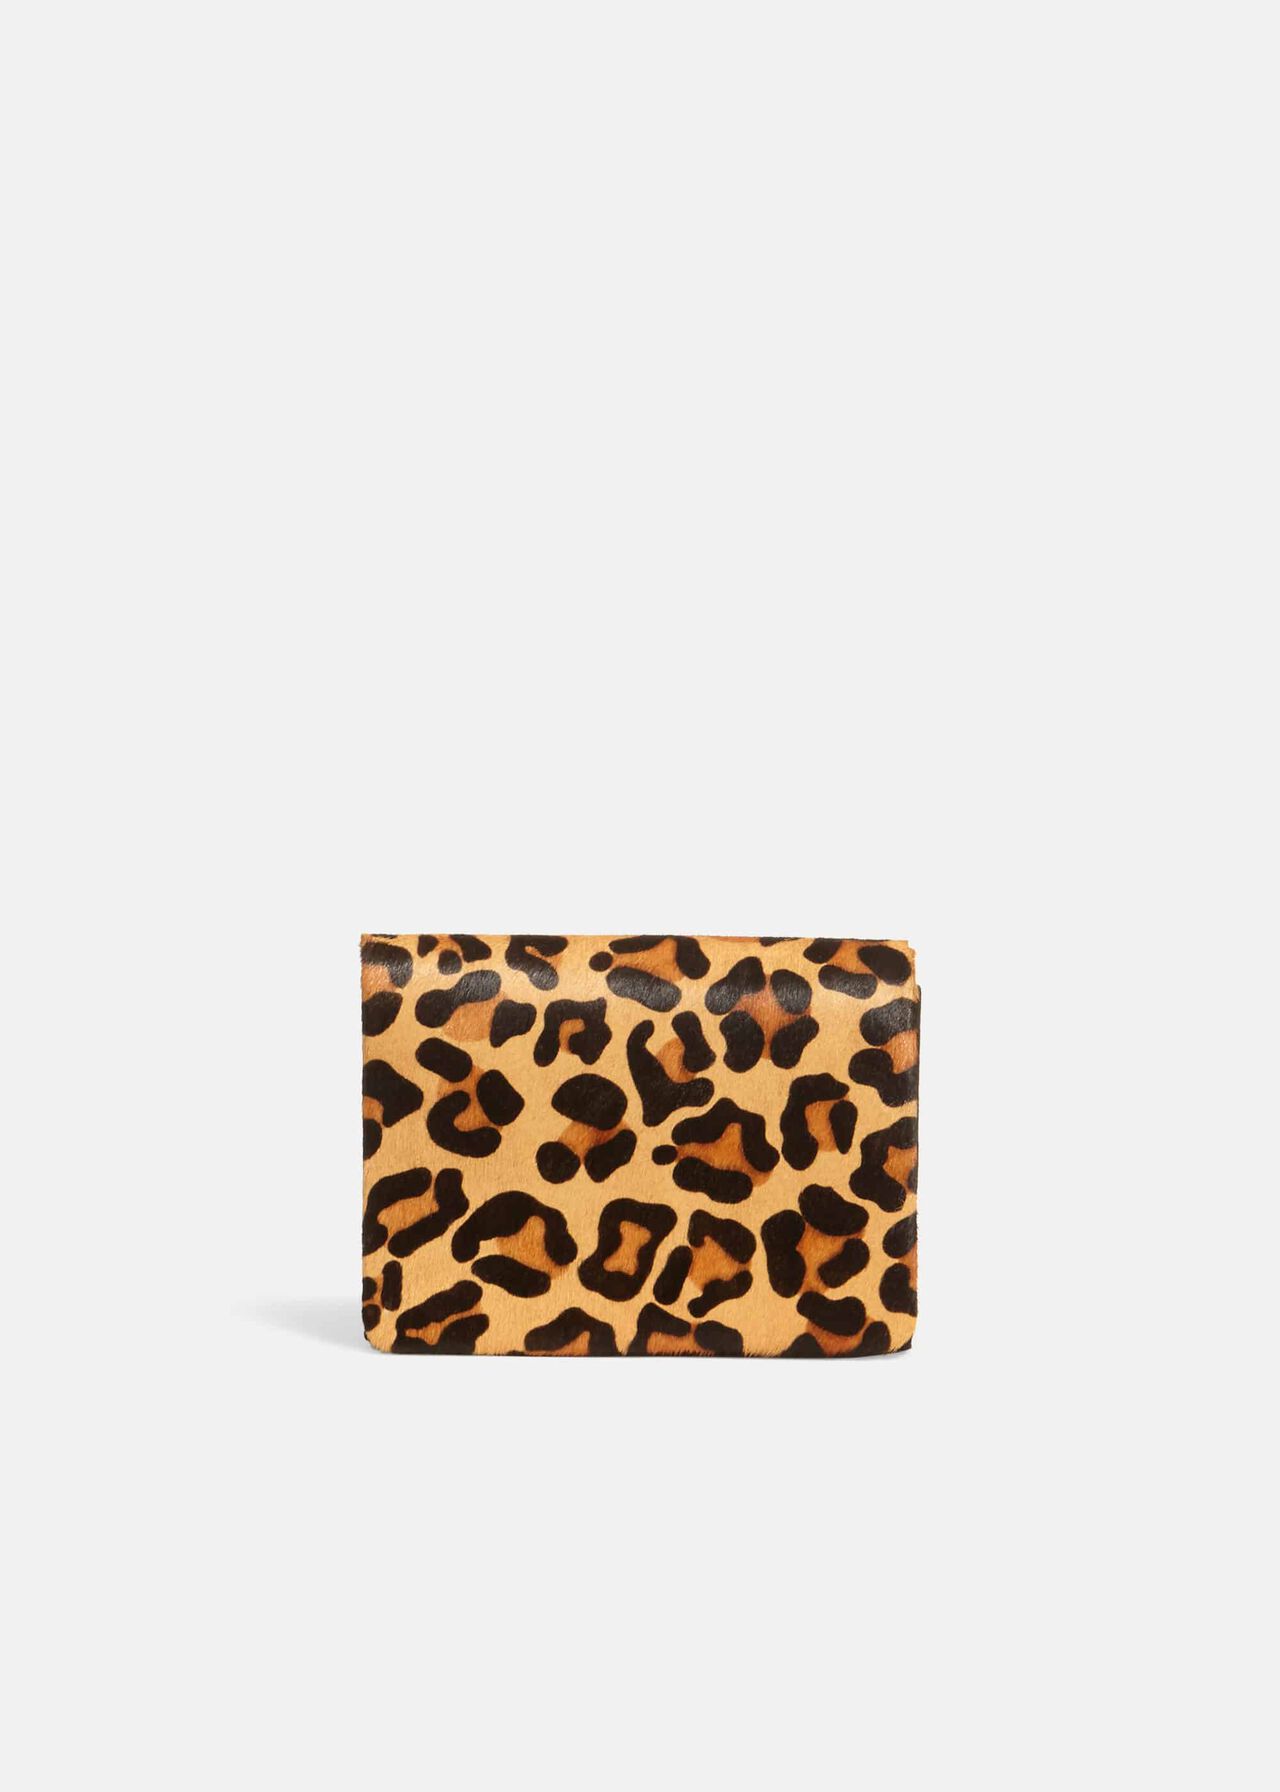 Lo Leopard Print Clutch | Phase Eight UK